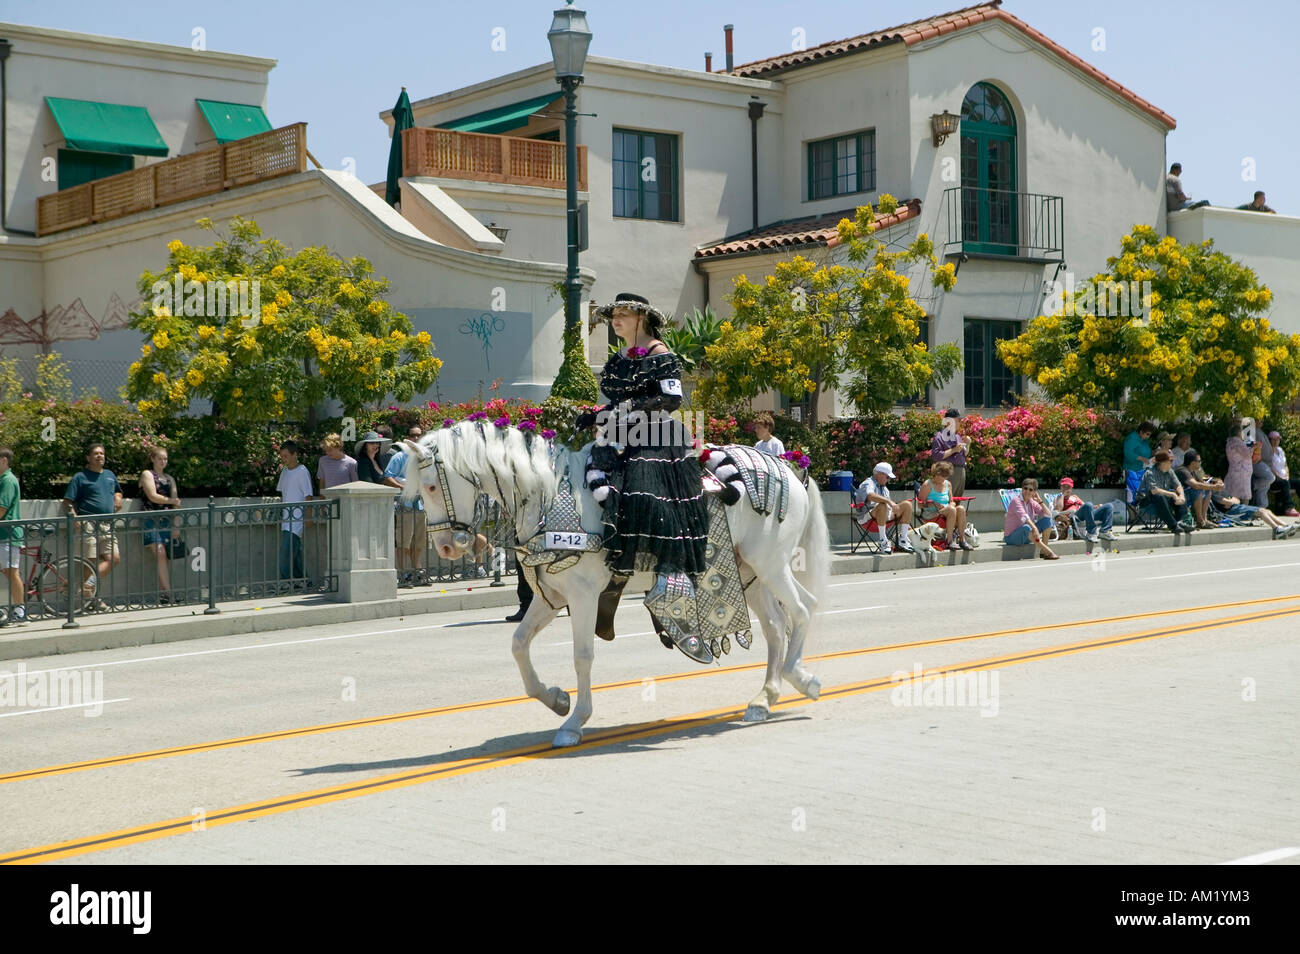 Woman with black Spanish dress riding horse during opening day parade down State Street Santa Barbara CA Old Spanish Days Stock Photo